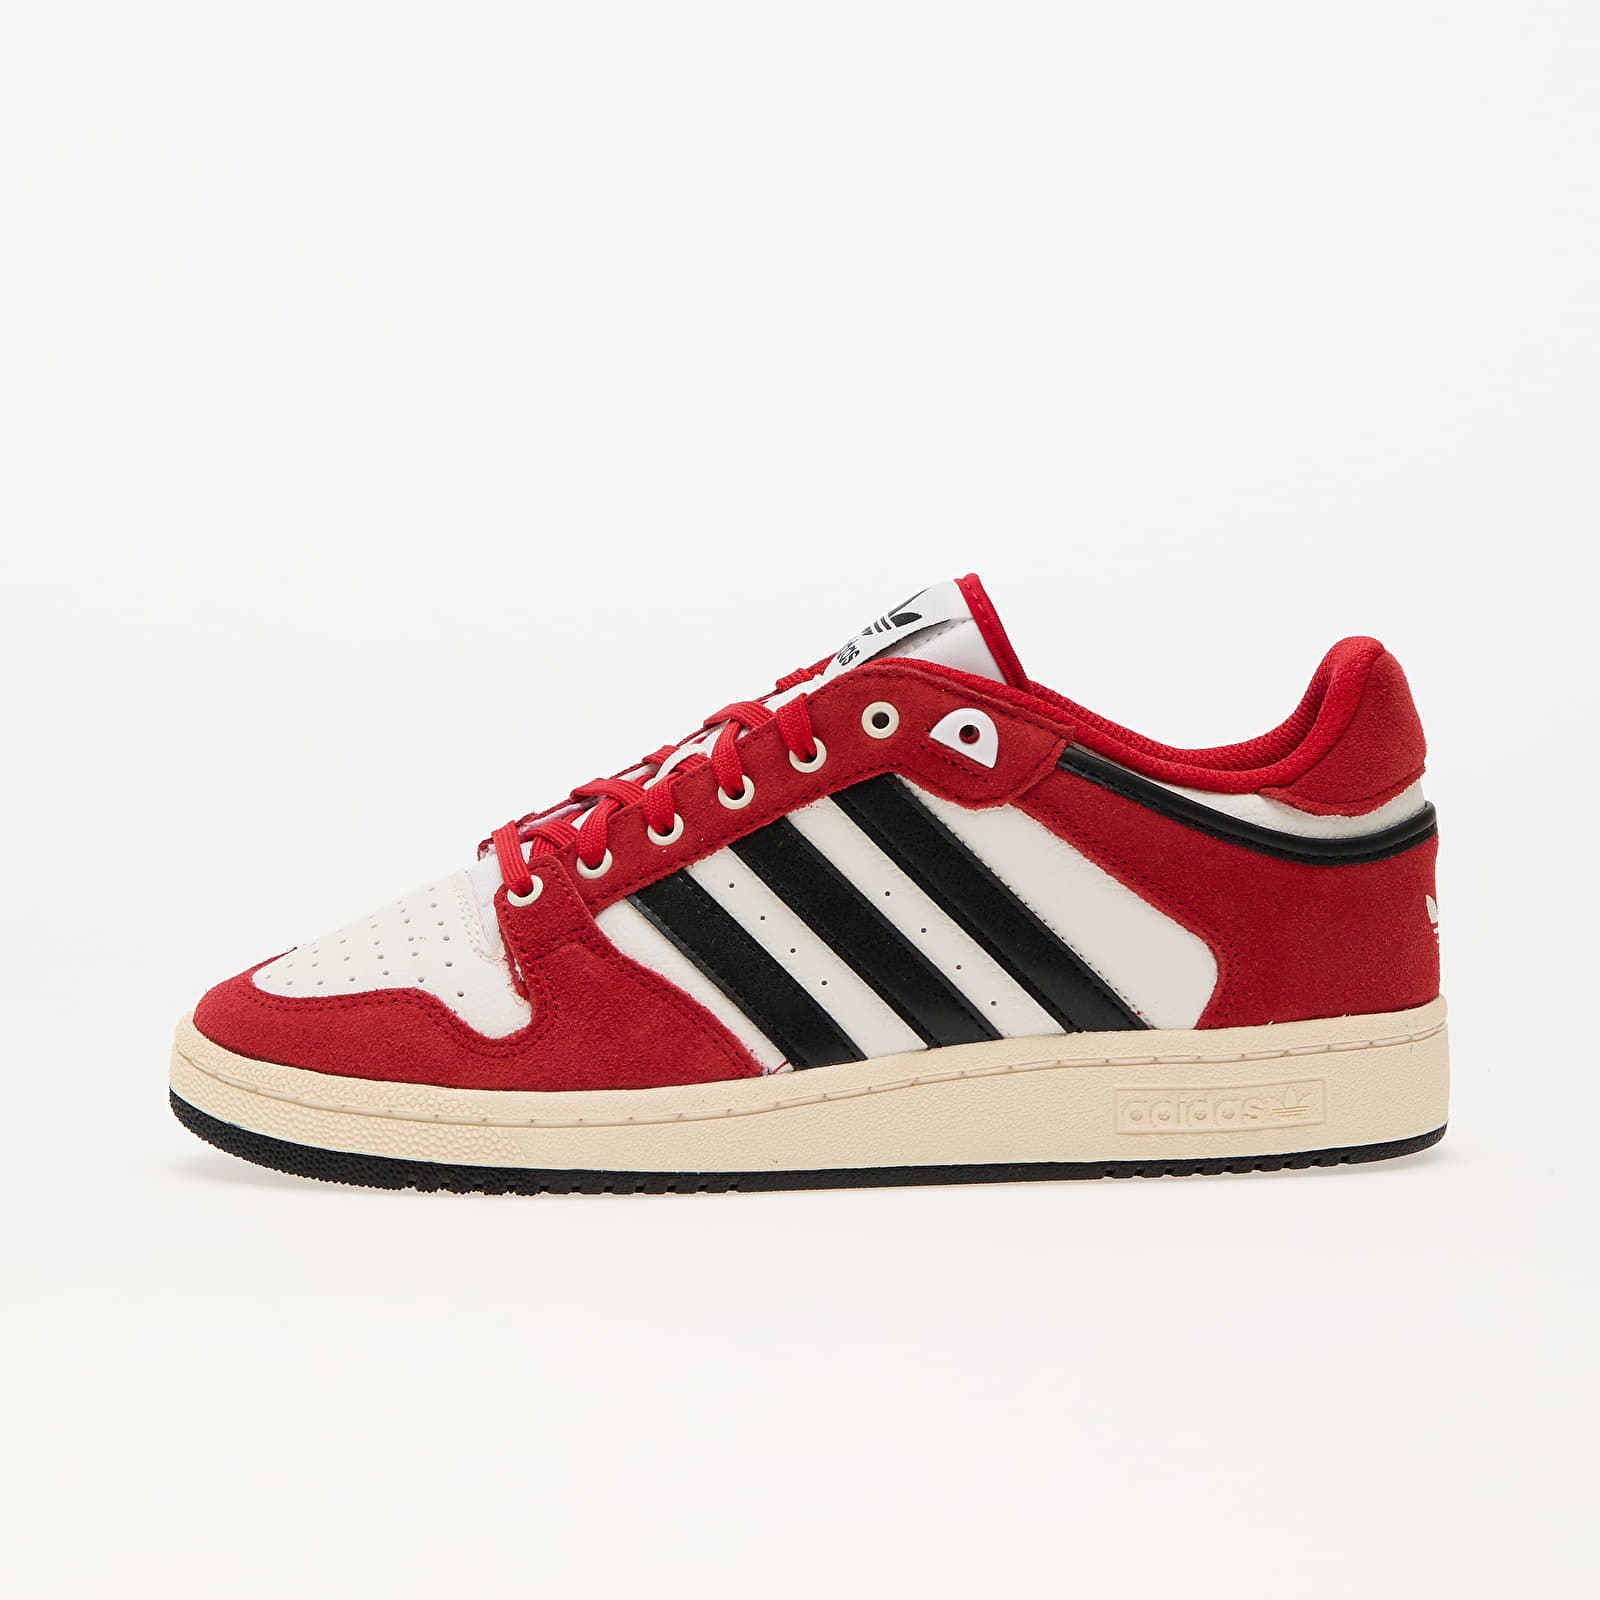 adidas Centennial Rm Better Scarlet/ Core Black/ Core White, Low-top sneakers